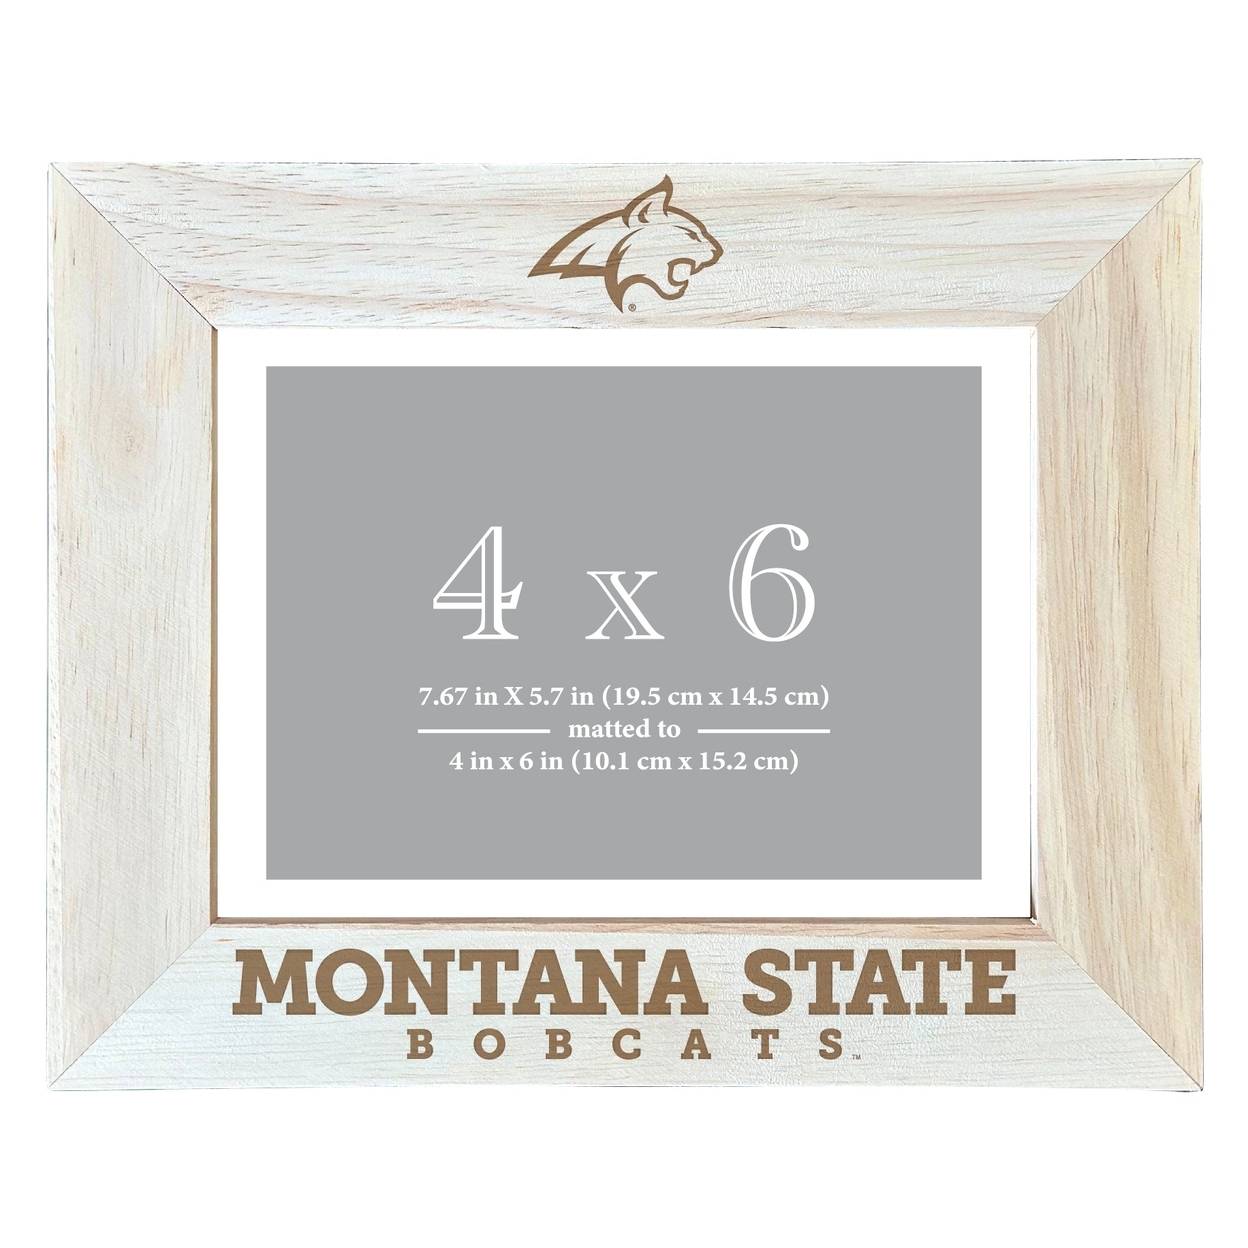 Montana State Bobcats Wooden Photo Frame Matted To 4 X 6 Inch - Etched